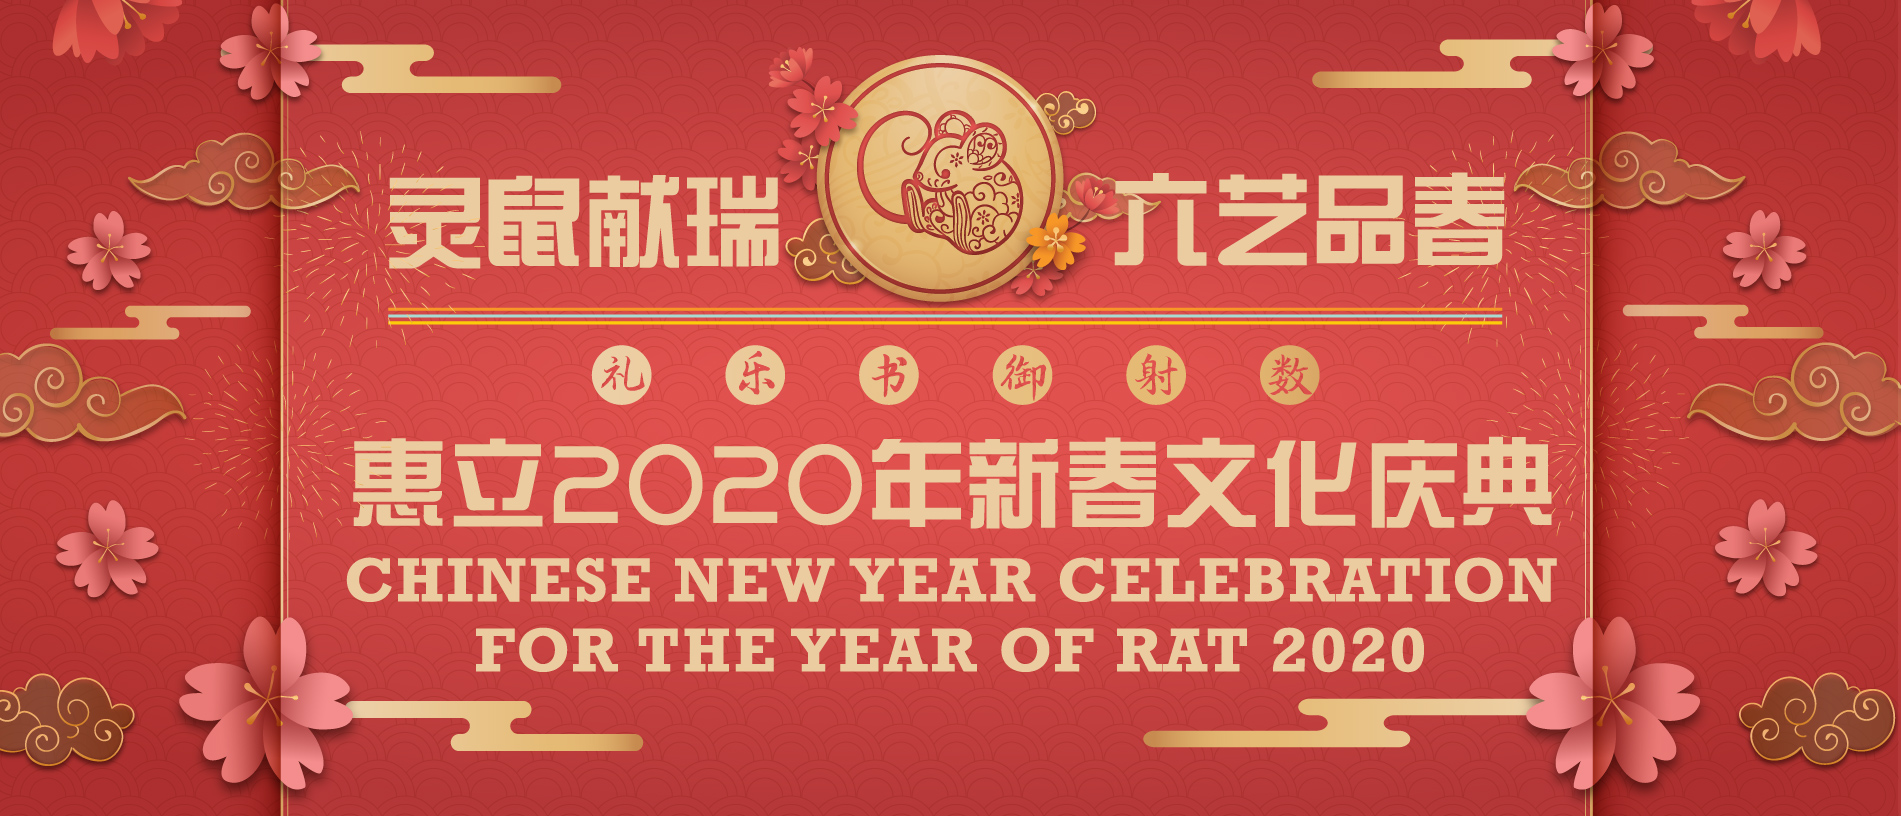 Chinese New Year Celebration for the Year of Rat 2020